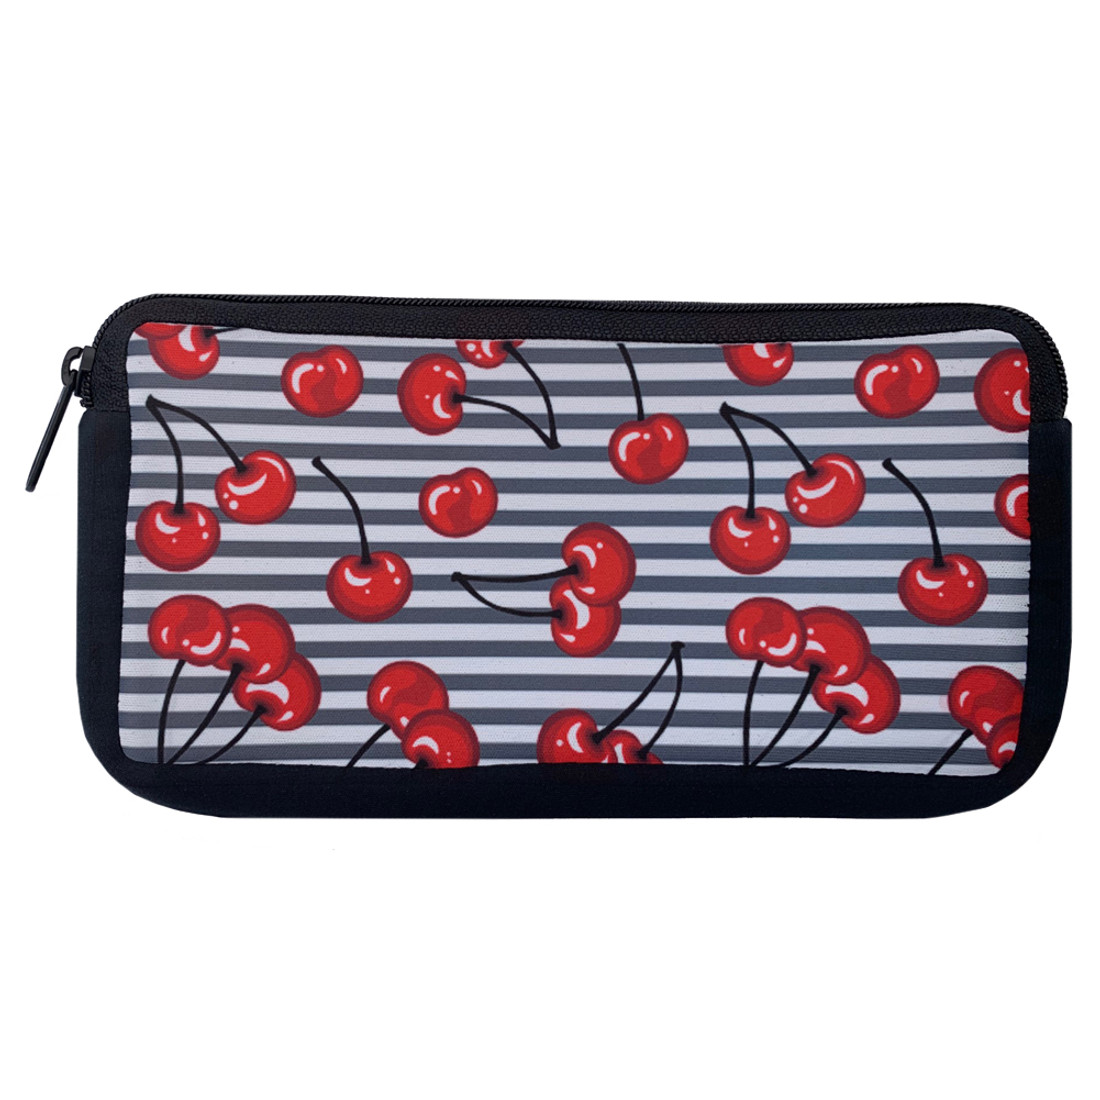 Rockabilly Cherries Cosmetic Bag Zippered Pouch